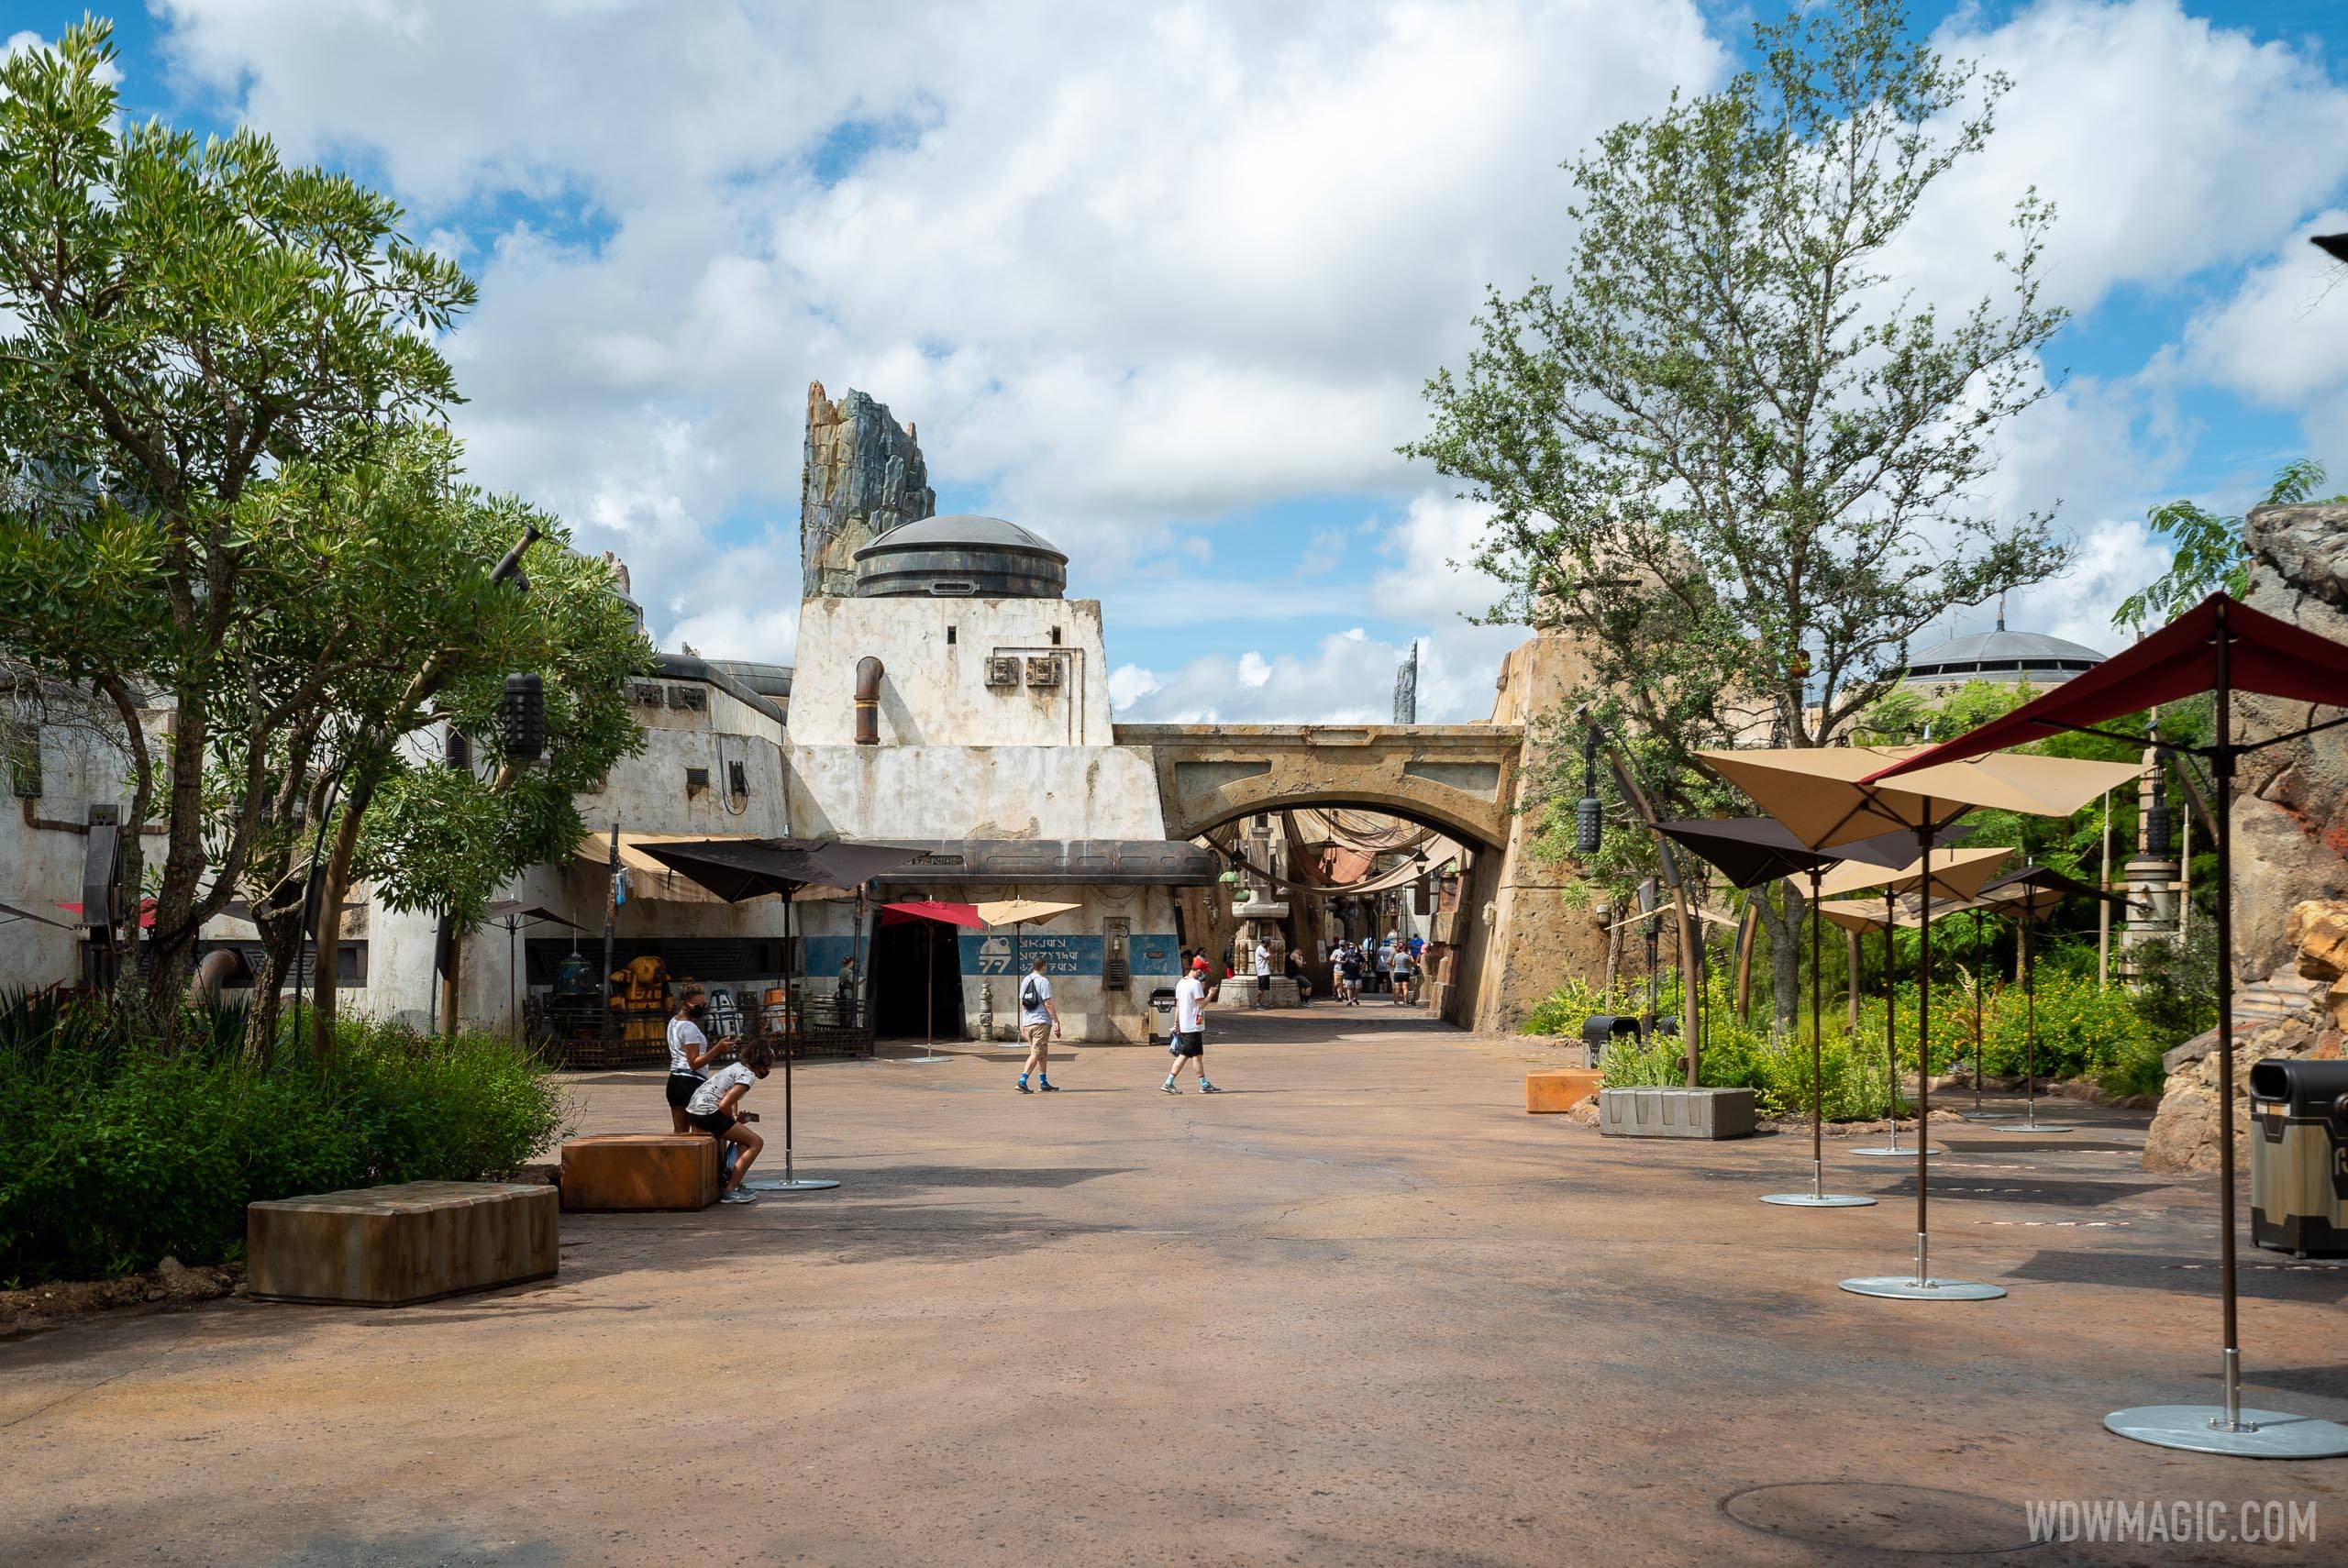 Guests at the Toy Story Land entrance to Galaxy's Edge